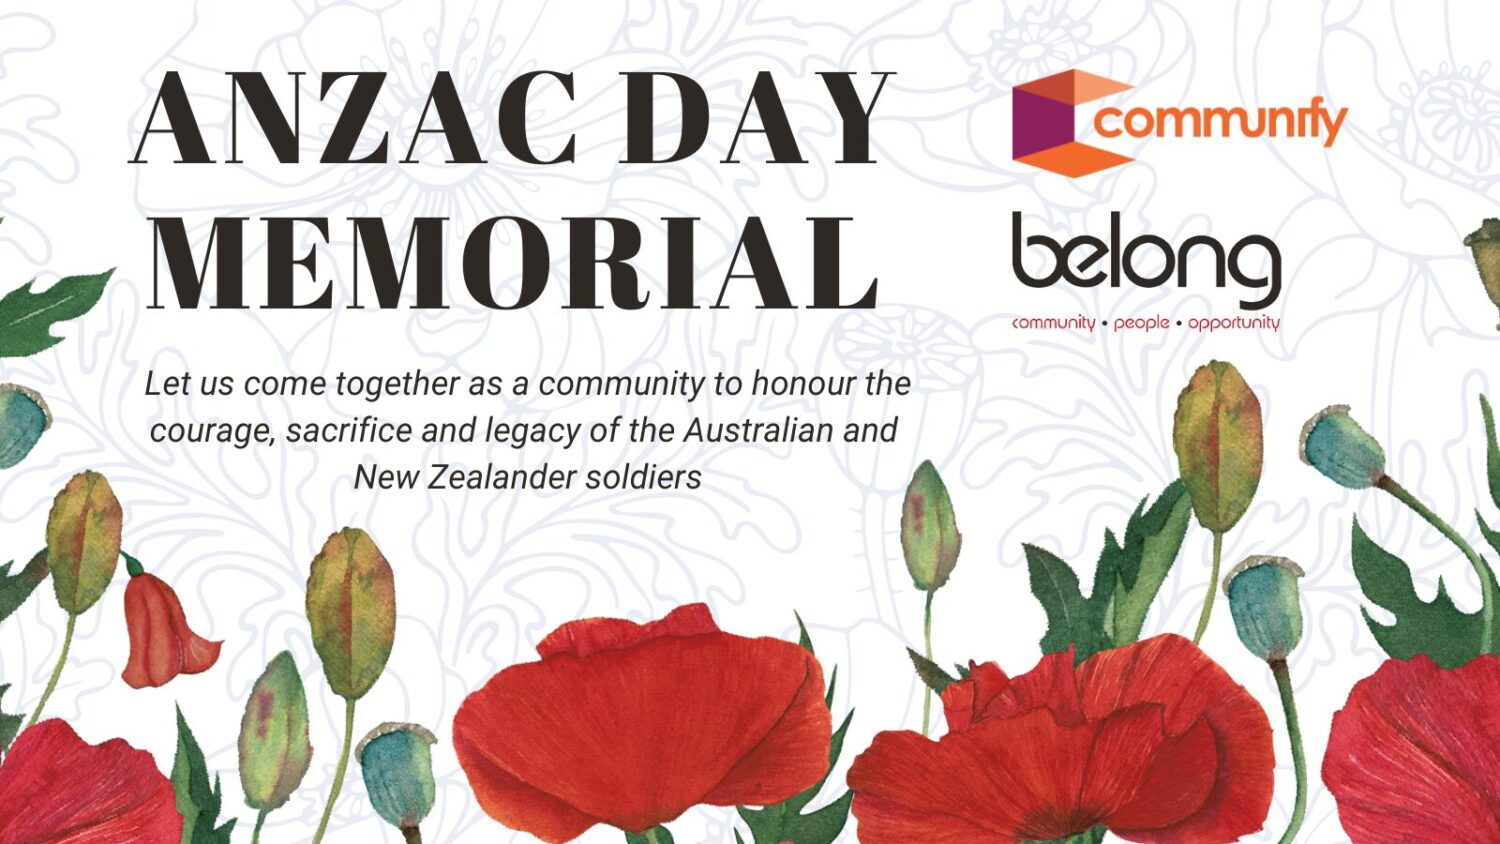 ANZAC Day memorial at Acacia Ridge - Let us come together as a community to honour the courage, sacrifice and legacy of the Australian and New Zealander soldiers